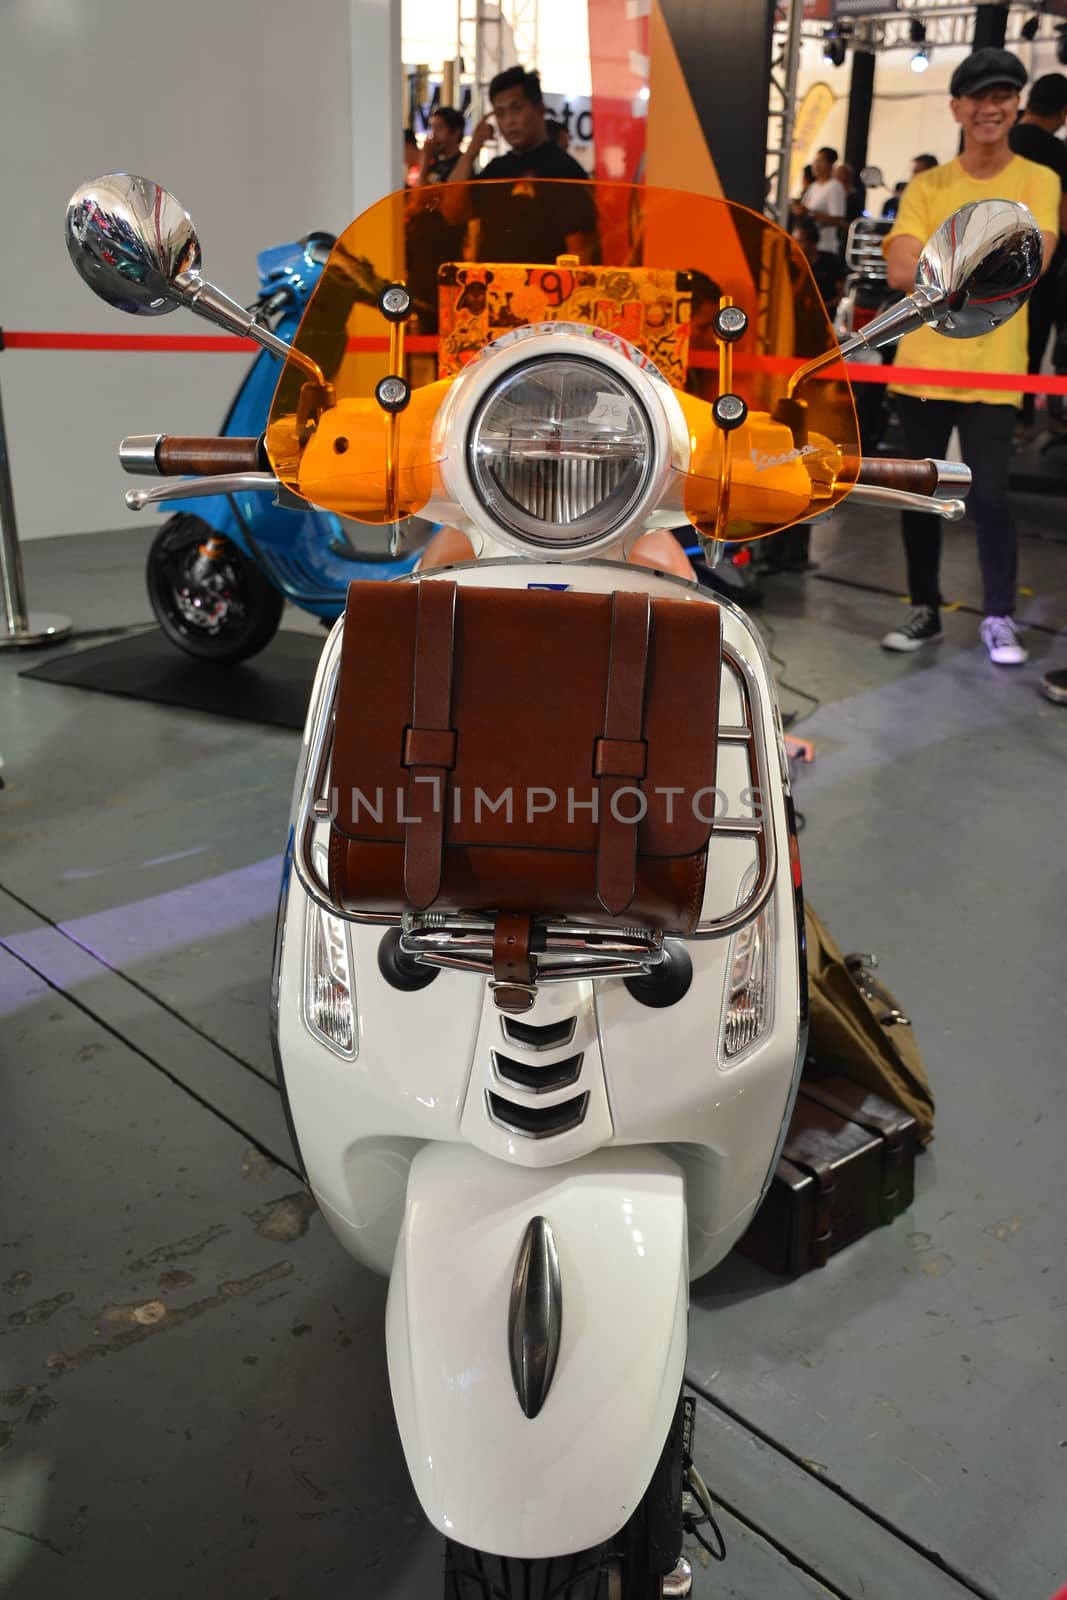 PASIG, PH - MAR. 7: Vespa motorcycle at 2nd Ride Ph on March 7, 2020 in Pasig, Philippines. Ride Ph is a motorcycle exhibit in the Philippines.